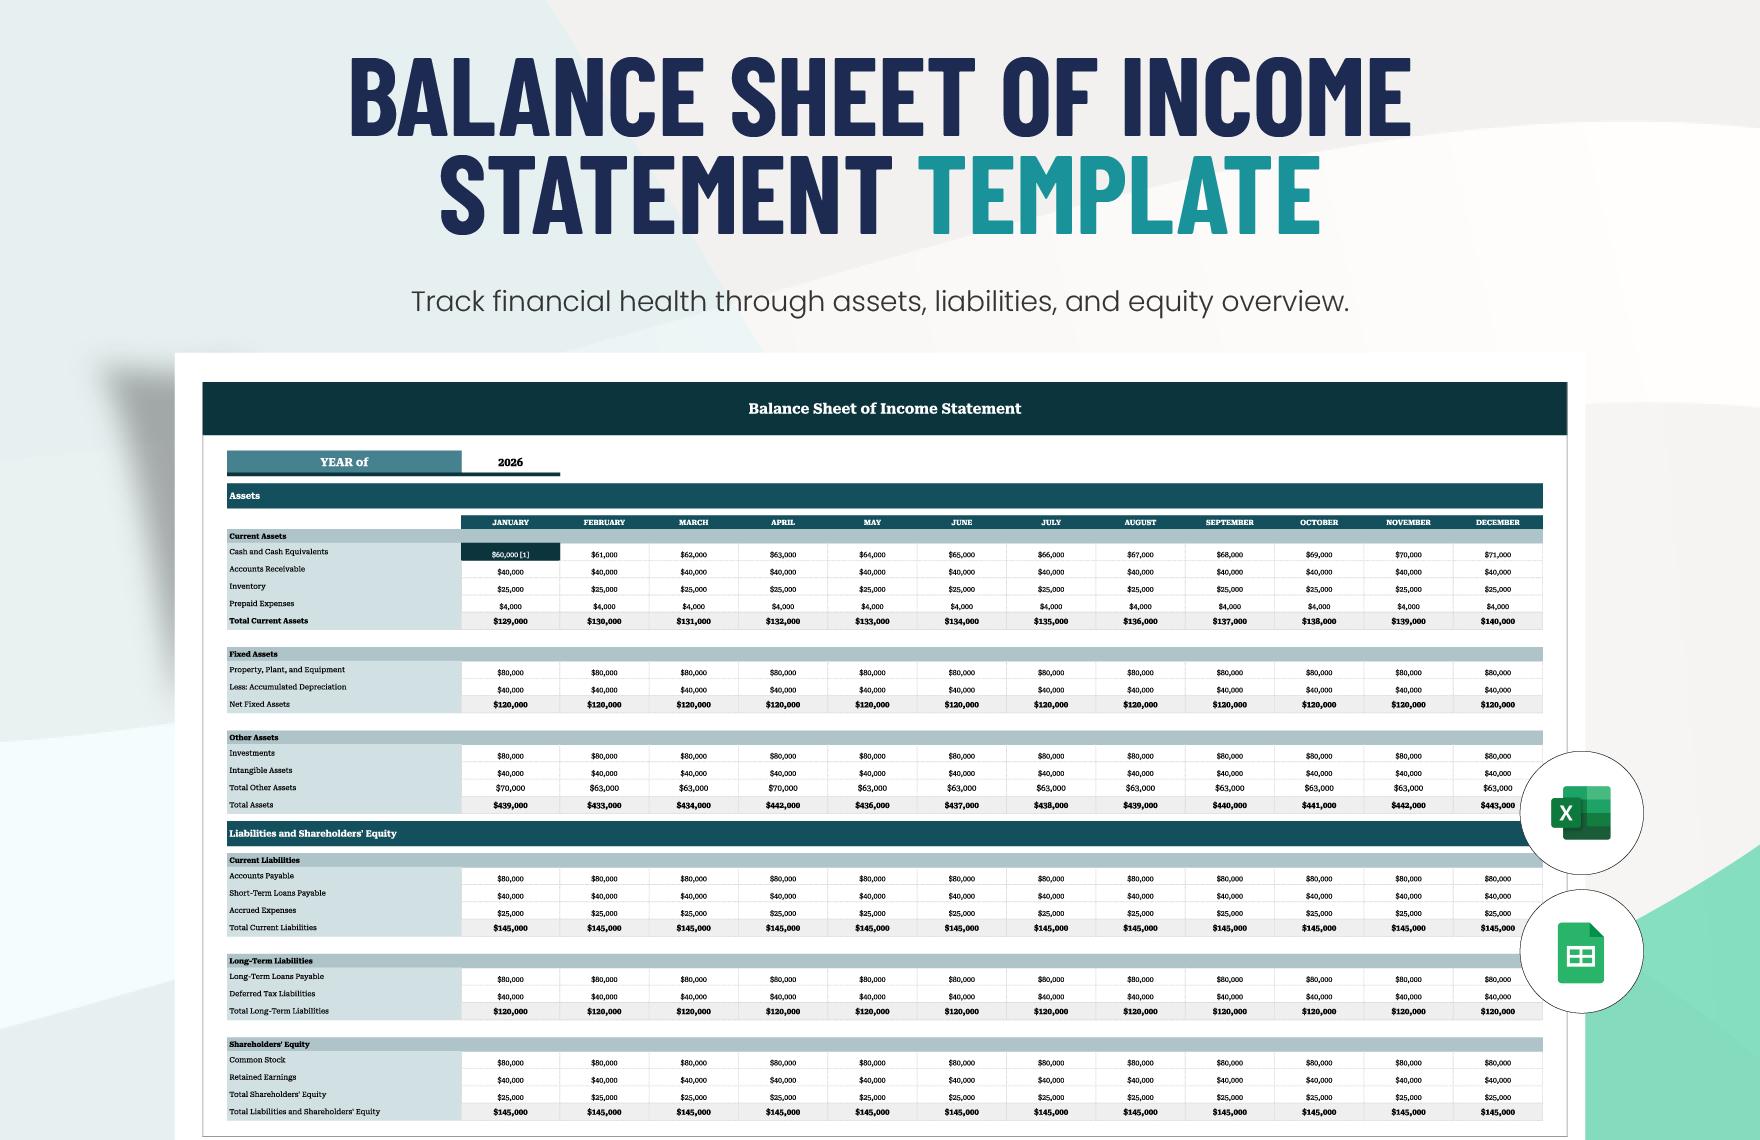 Balance Sheet of Income Statement Template in Excel, Google Sheets